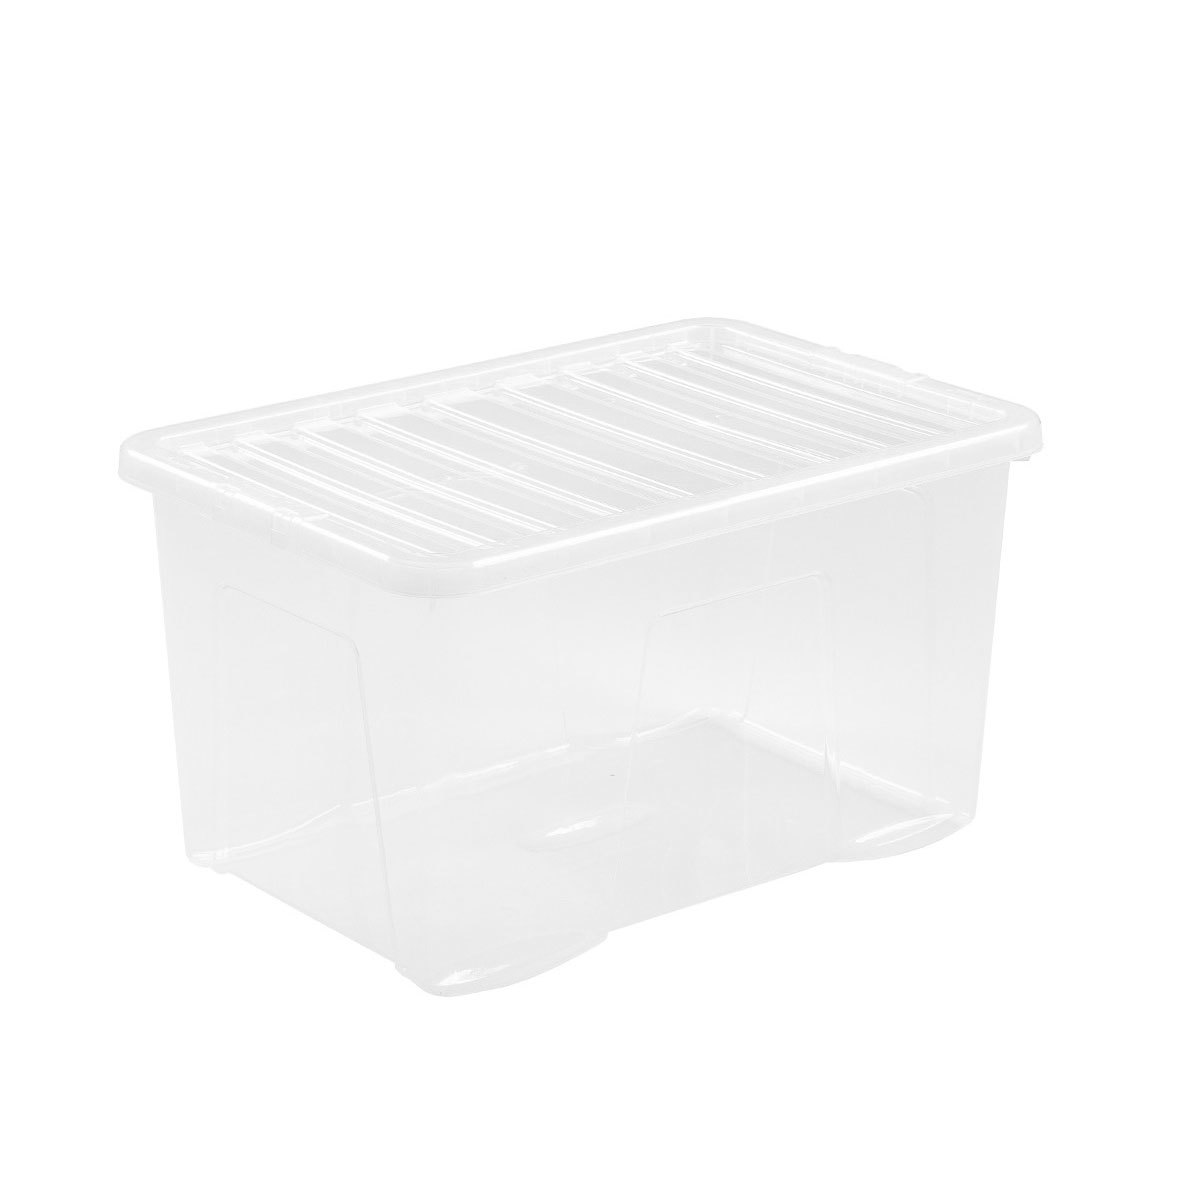 image of plastic box with closed lid